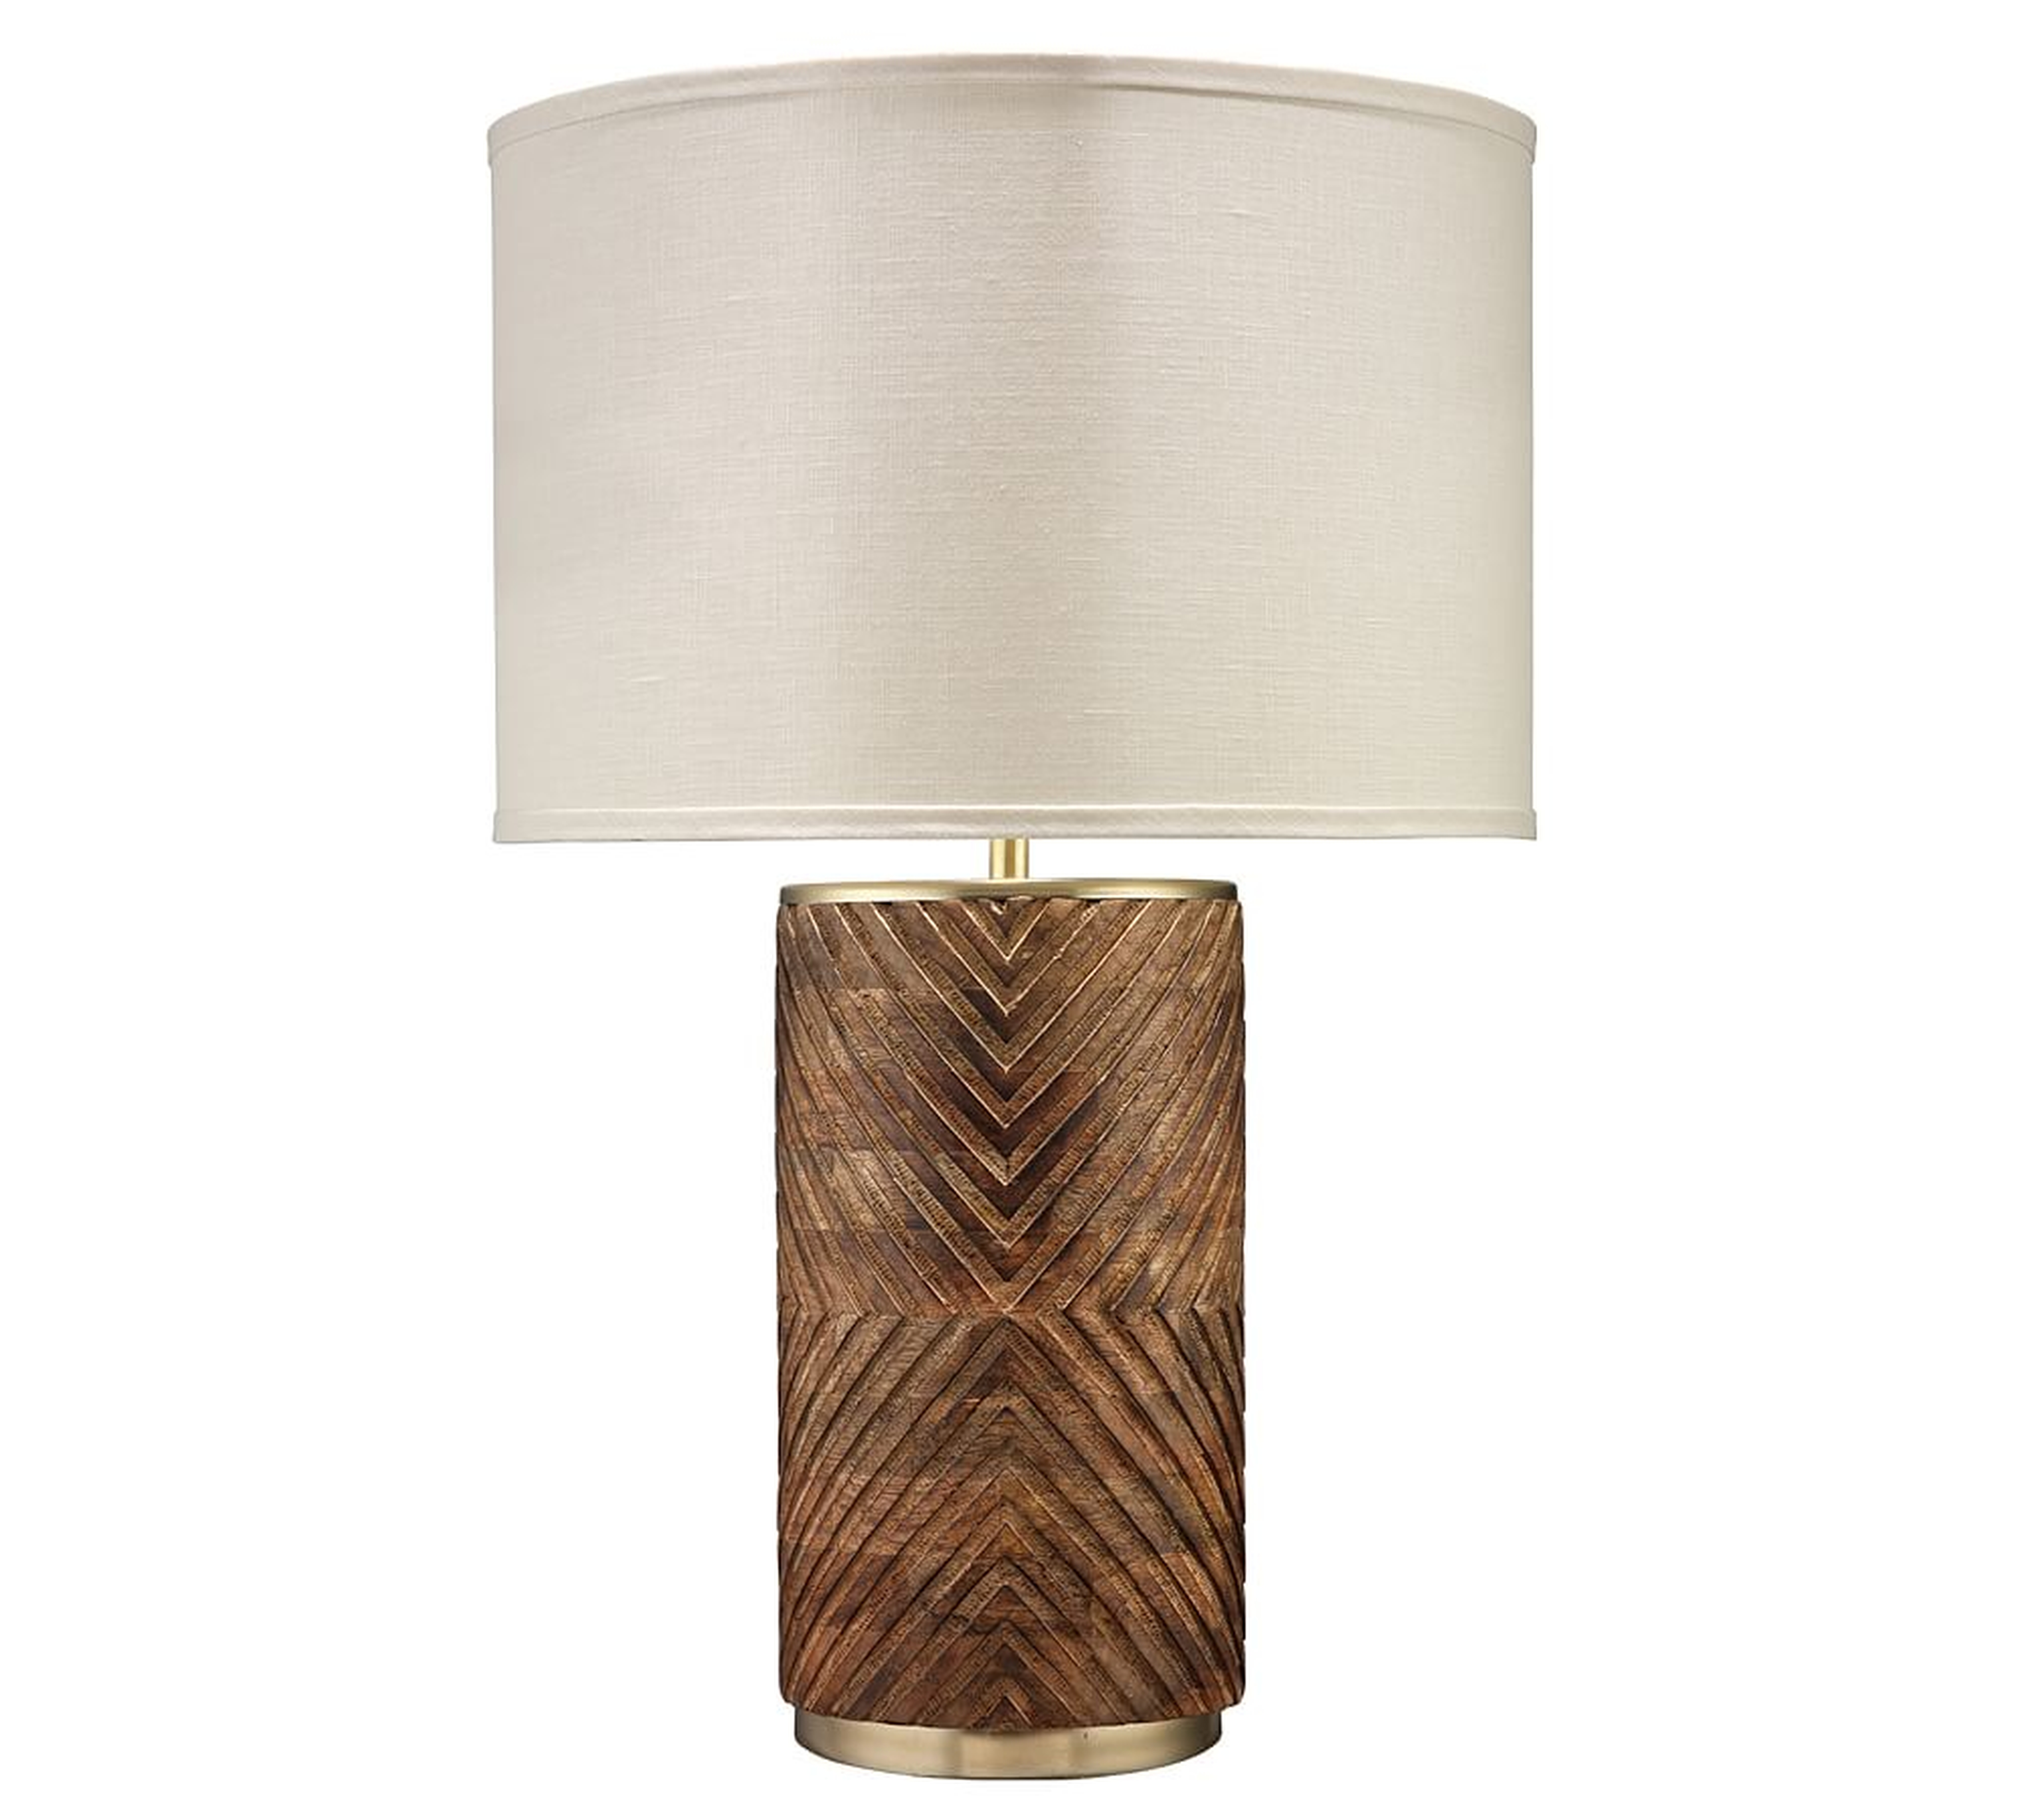 Solana Hand Carved Wood Table Lamp, Matte Brass - Pottery Barn